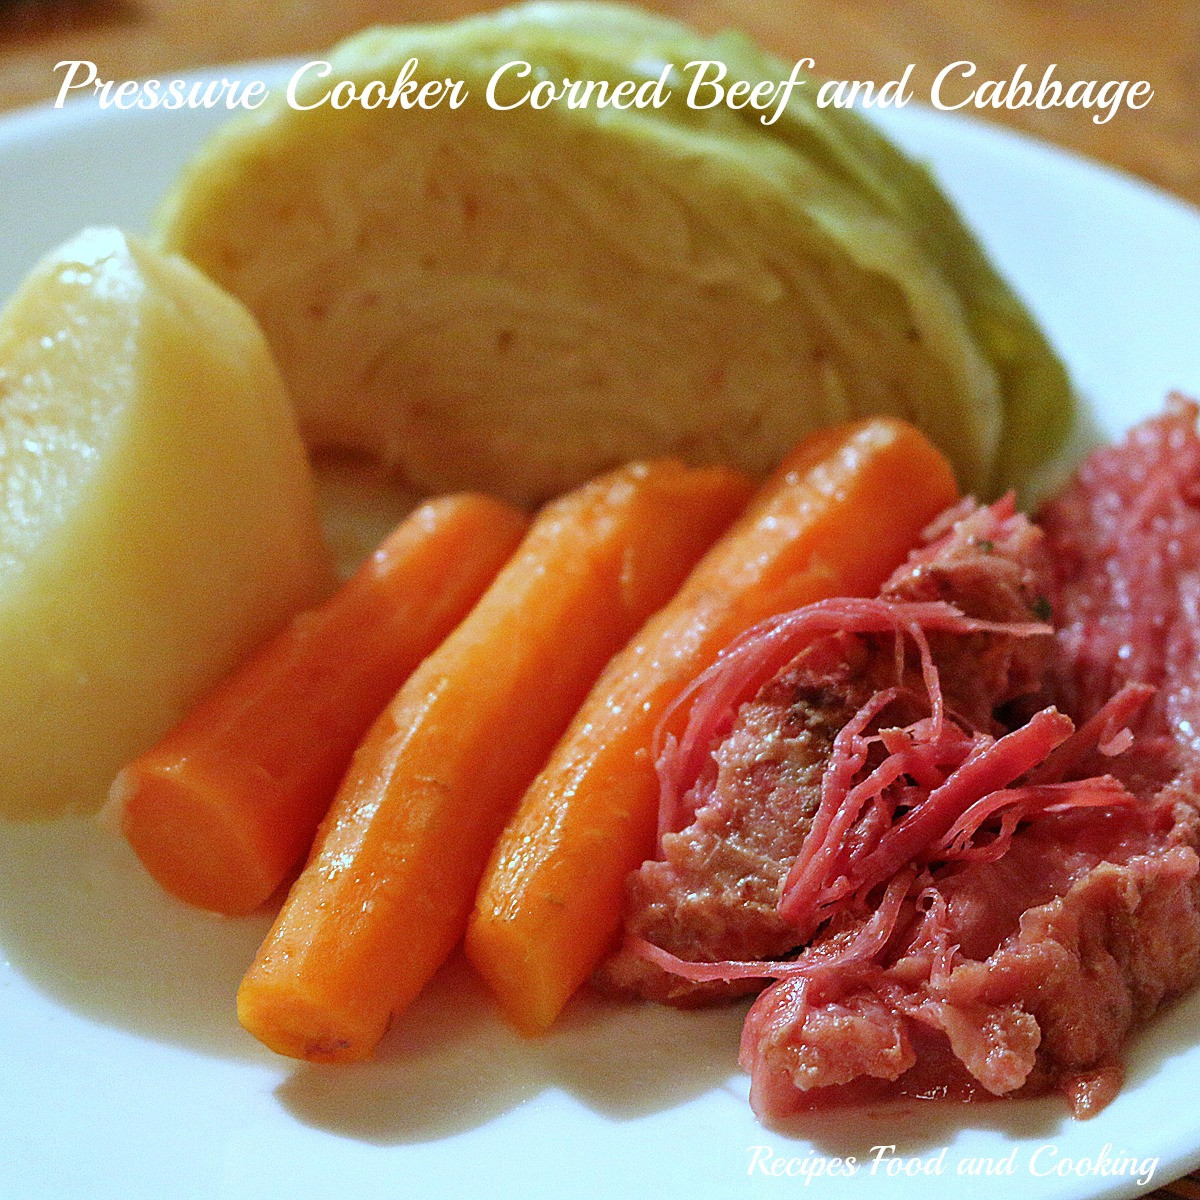 Pressure Cooker Corned Beef And Cabbage
 Pressure Cooker Corned Beef with Cabbage Carrots and Potatoes